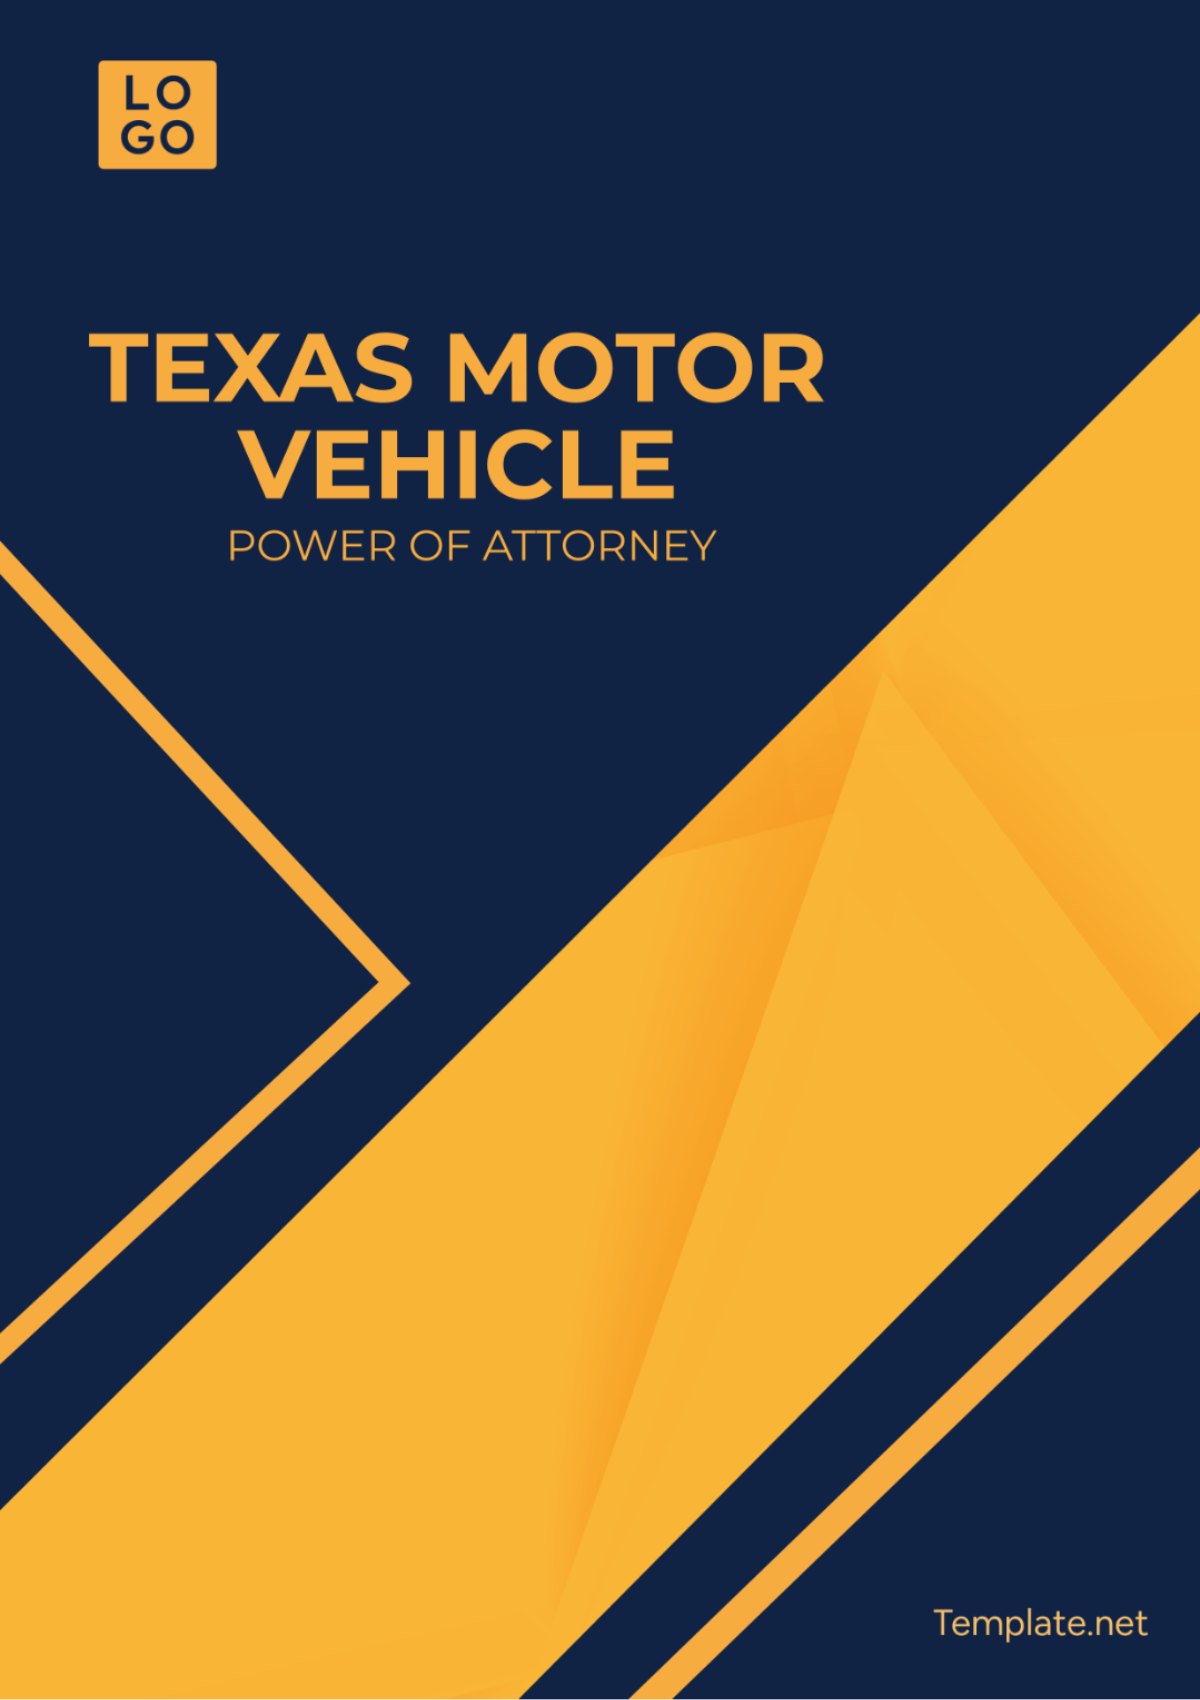 Texas Motor Vehicle Power of Attorney Template